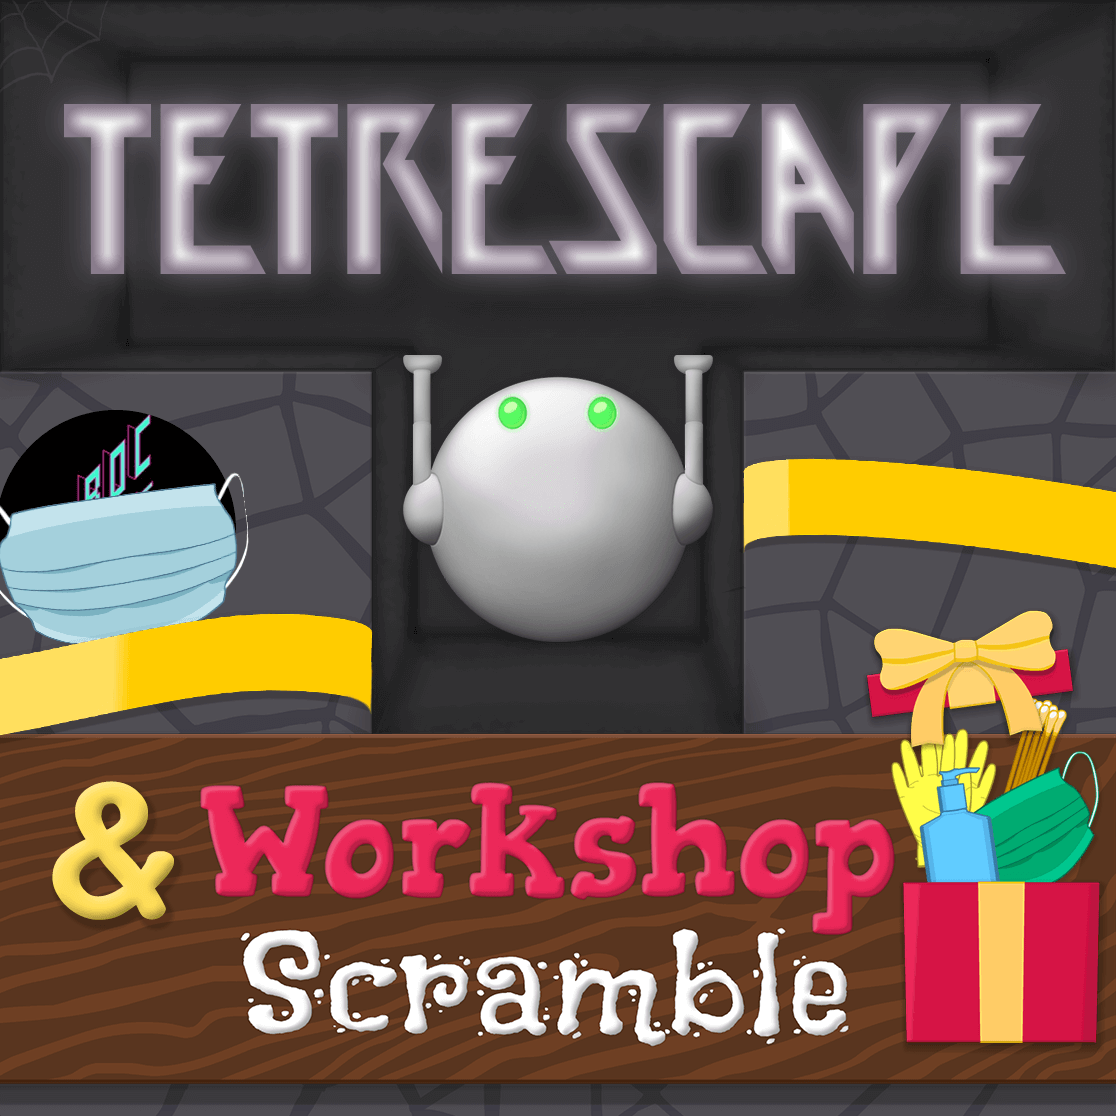 The TetrEscape logo with a robot.  The ROC Game Fest logo is hidden by a mask.  The Workshop Scramble logo with a present box with supplies to stay safe from COVID-19.